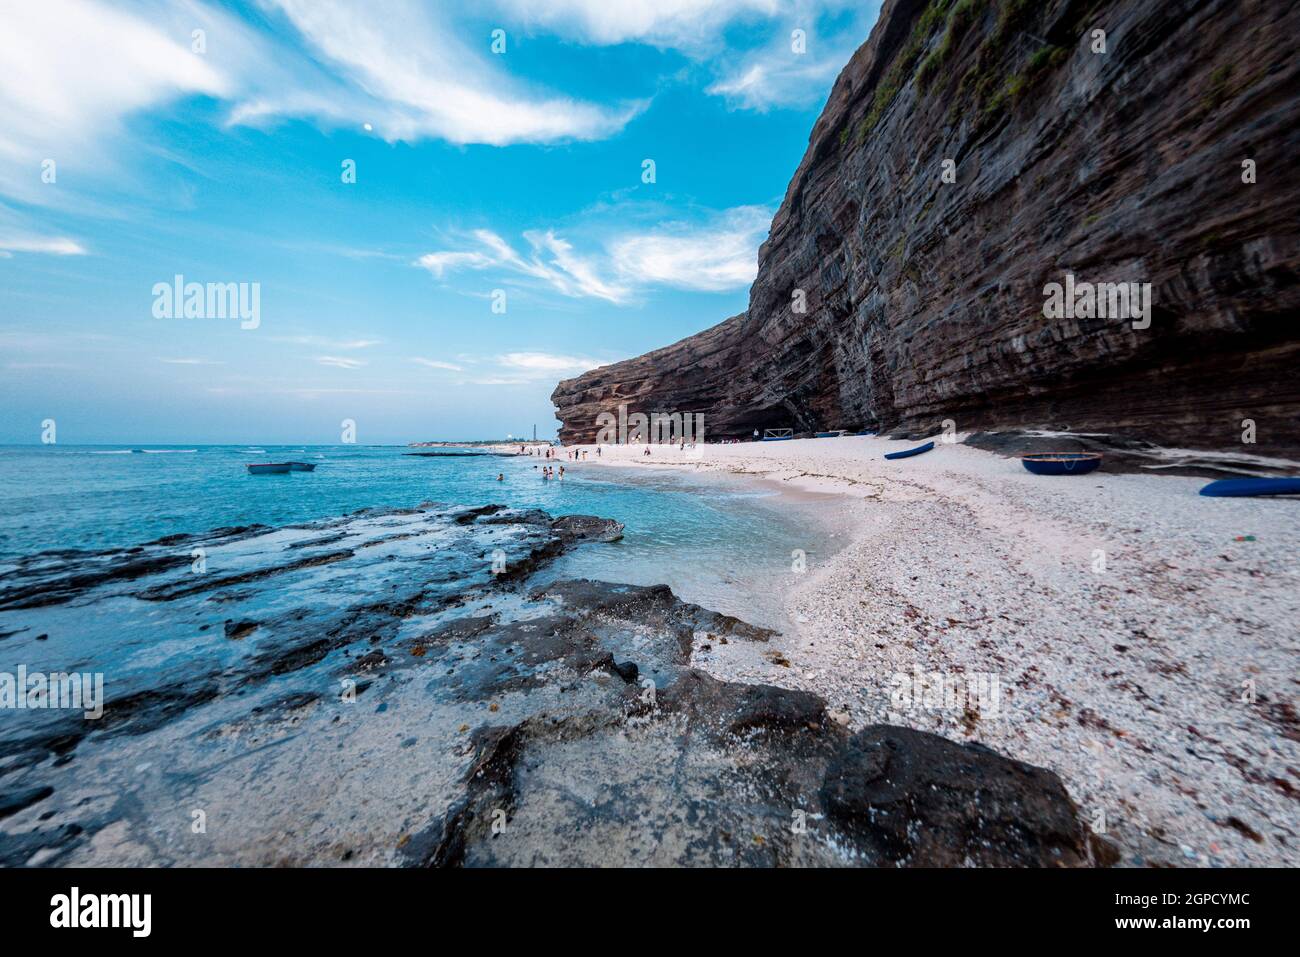 Wavy Cave with Great cliffs and the sea on Ly Son Island, Quang Ngai Province, Vietnam Stock Photo